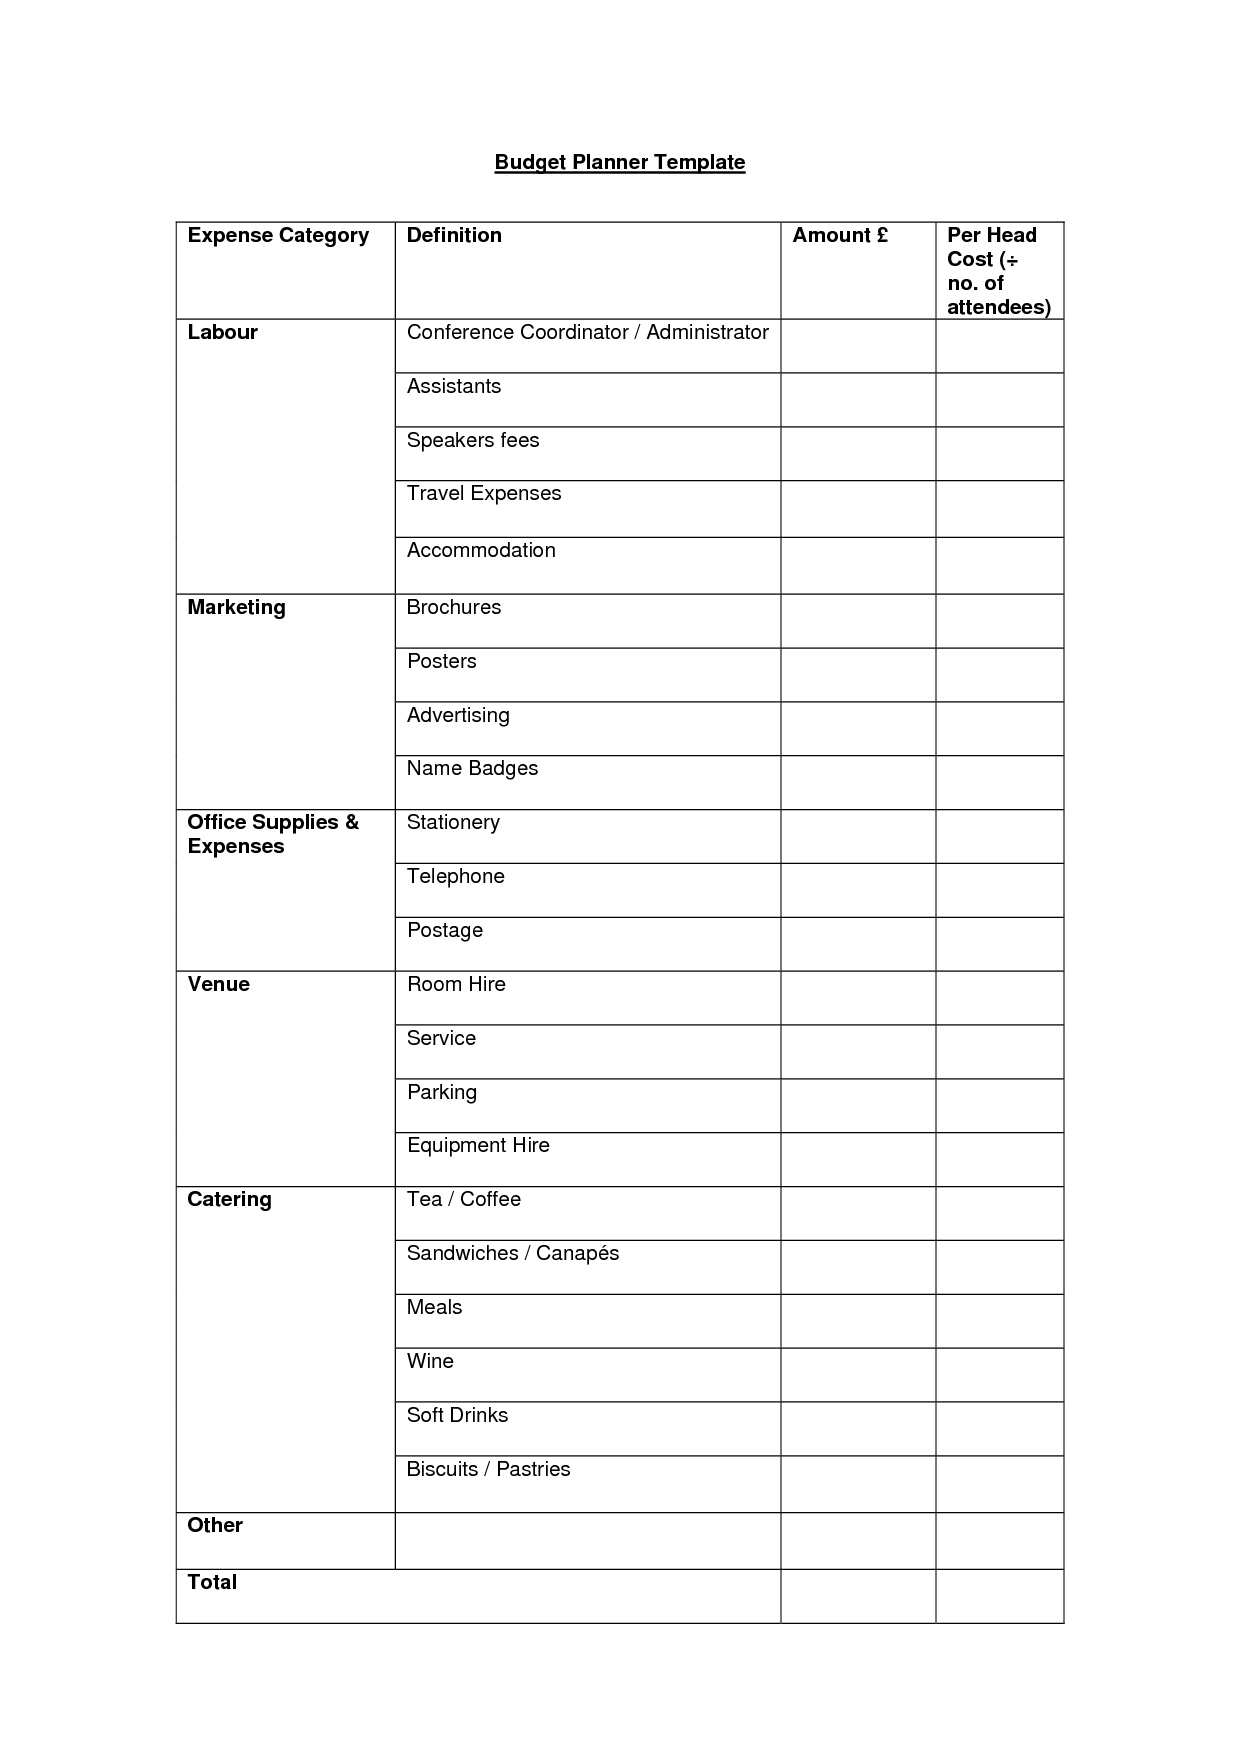 Budget Planner Template Free | Free Business Template